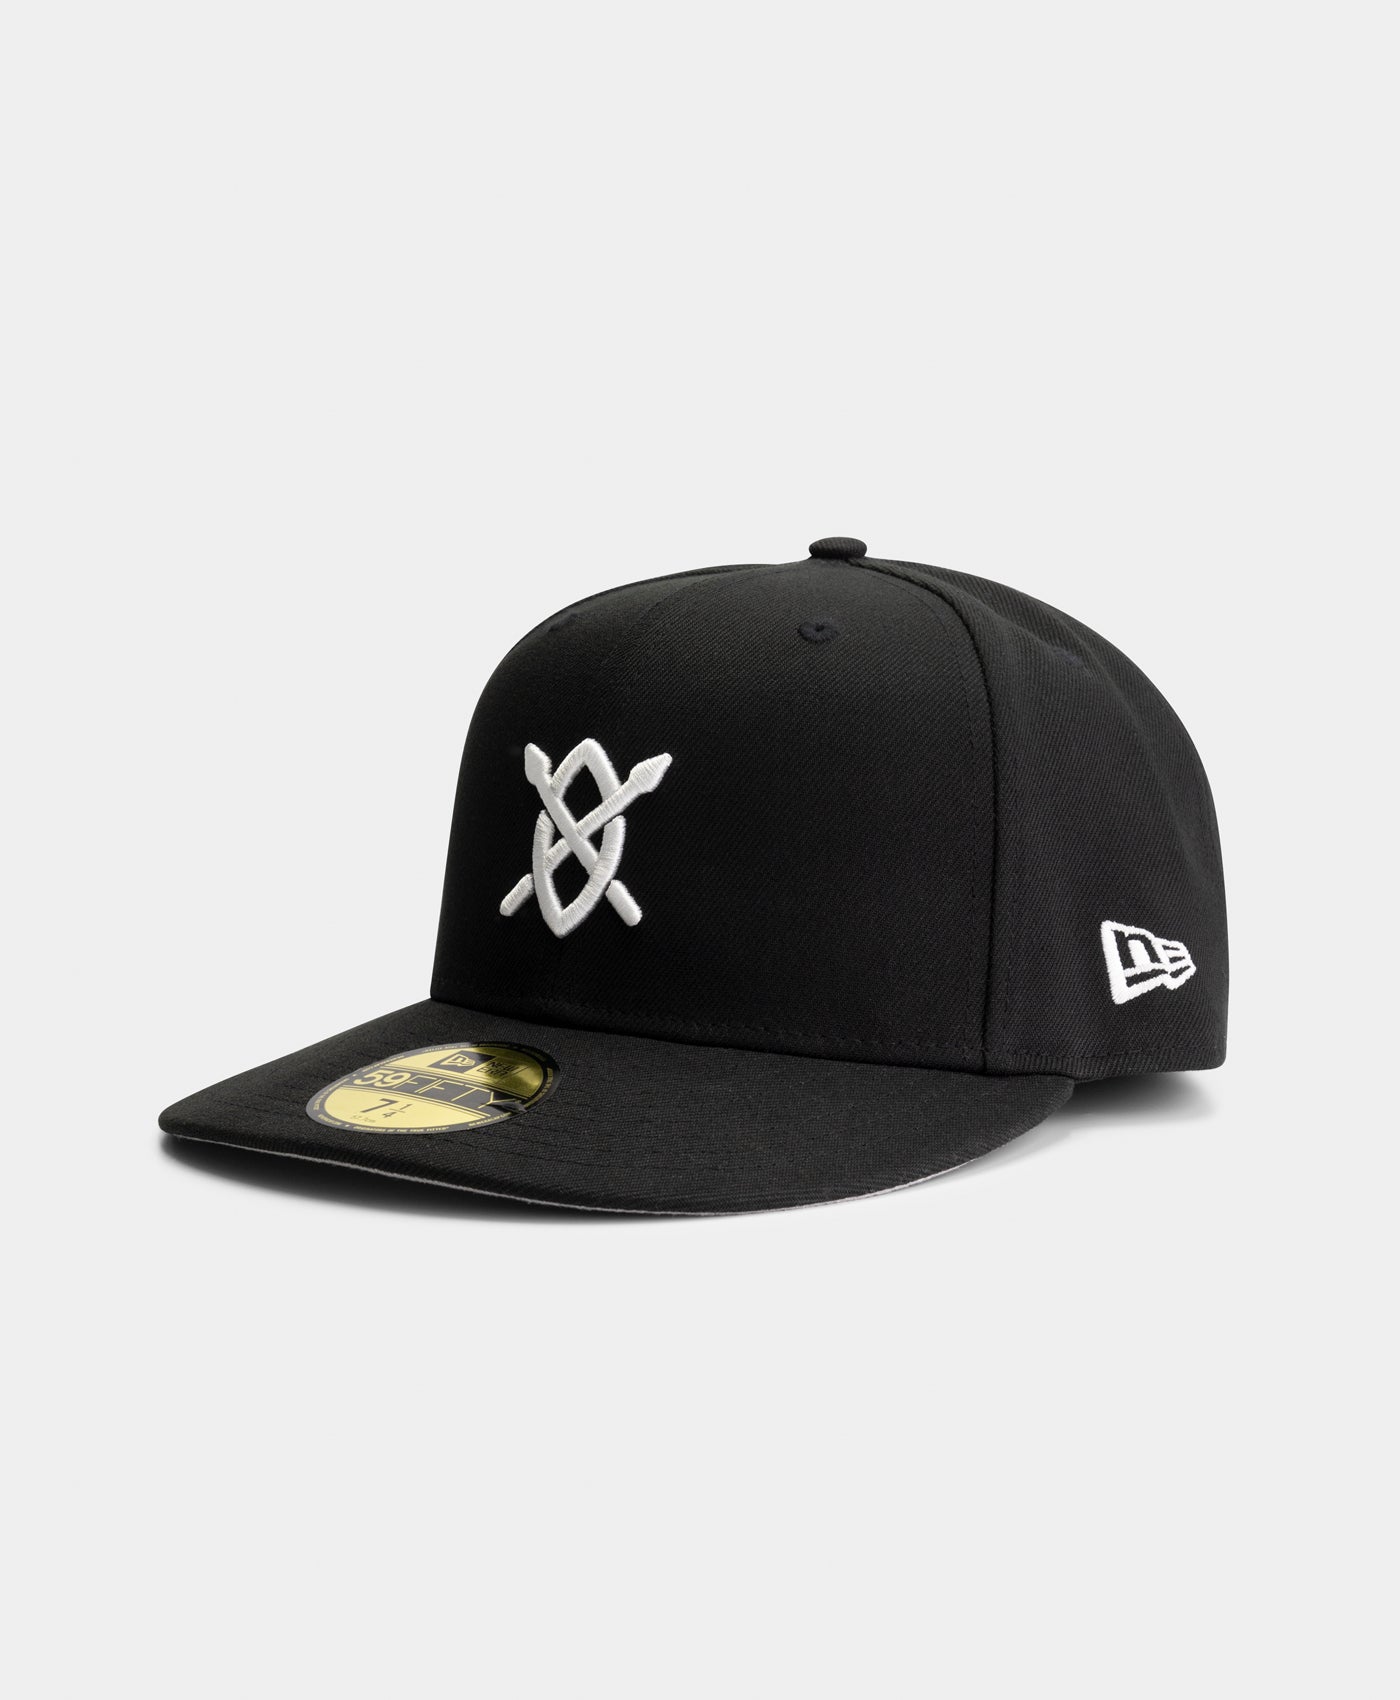 DP - Black Daily Paper x New Era 59FIFTY Fitted Cap - Packshot - Front